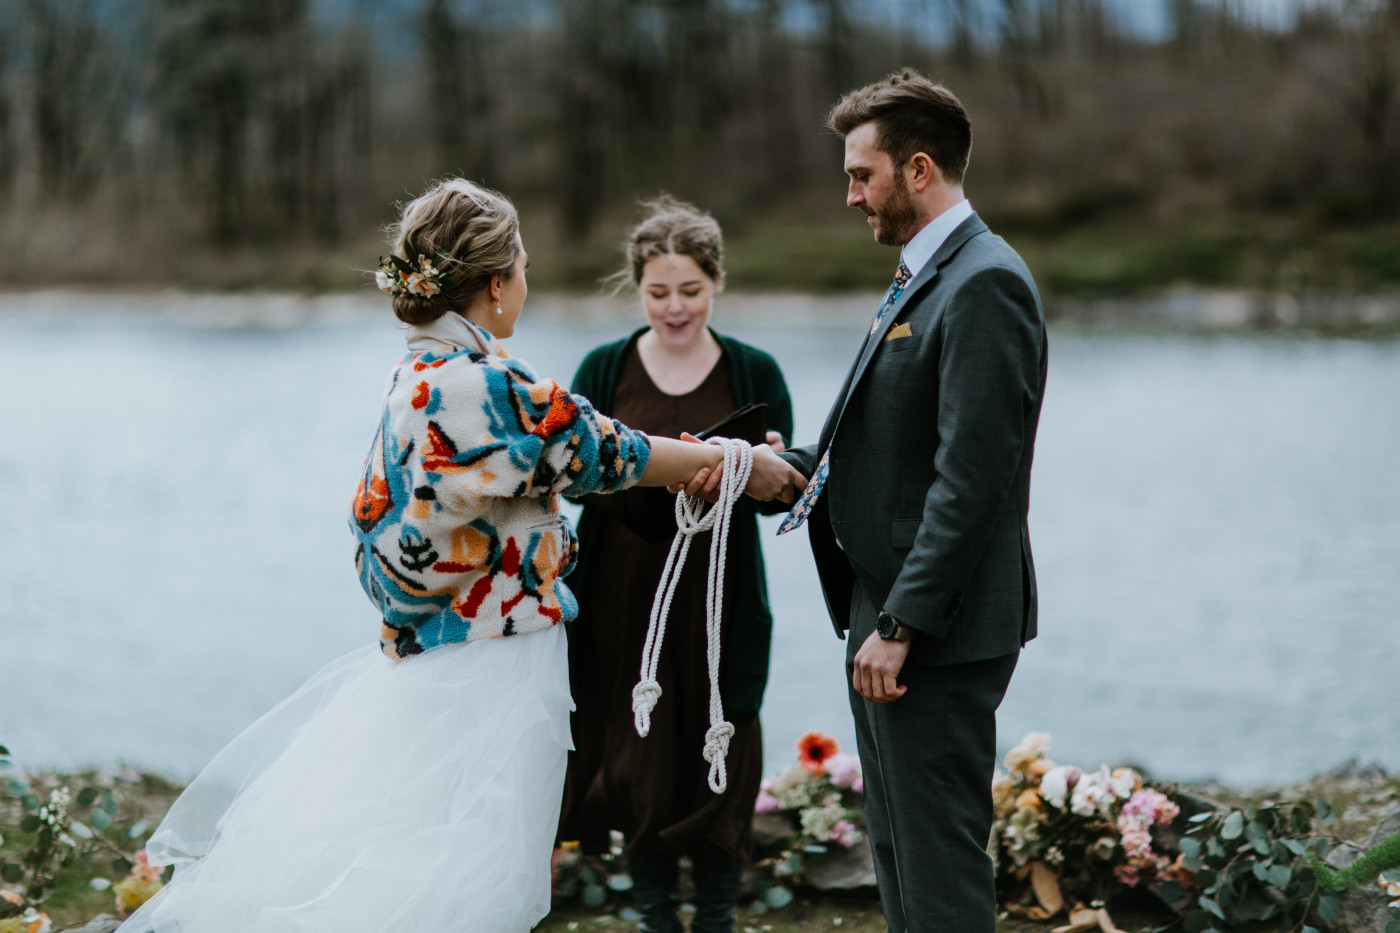 Lennie and Allison doing the hand tying ceremony with rope. Elopement photography at Columbia River Gorge by Sienna Plus Josh.